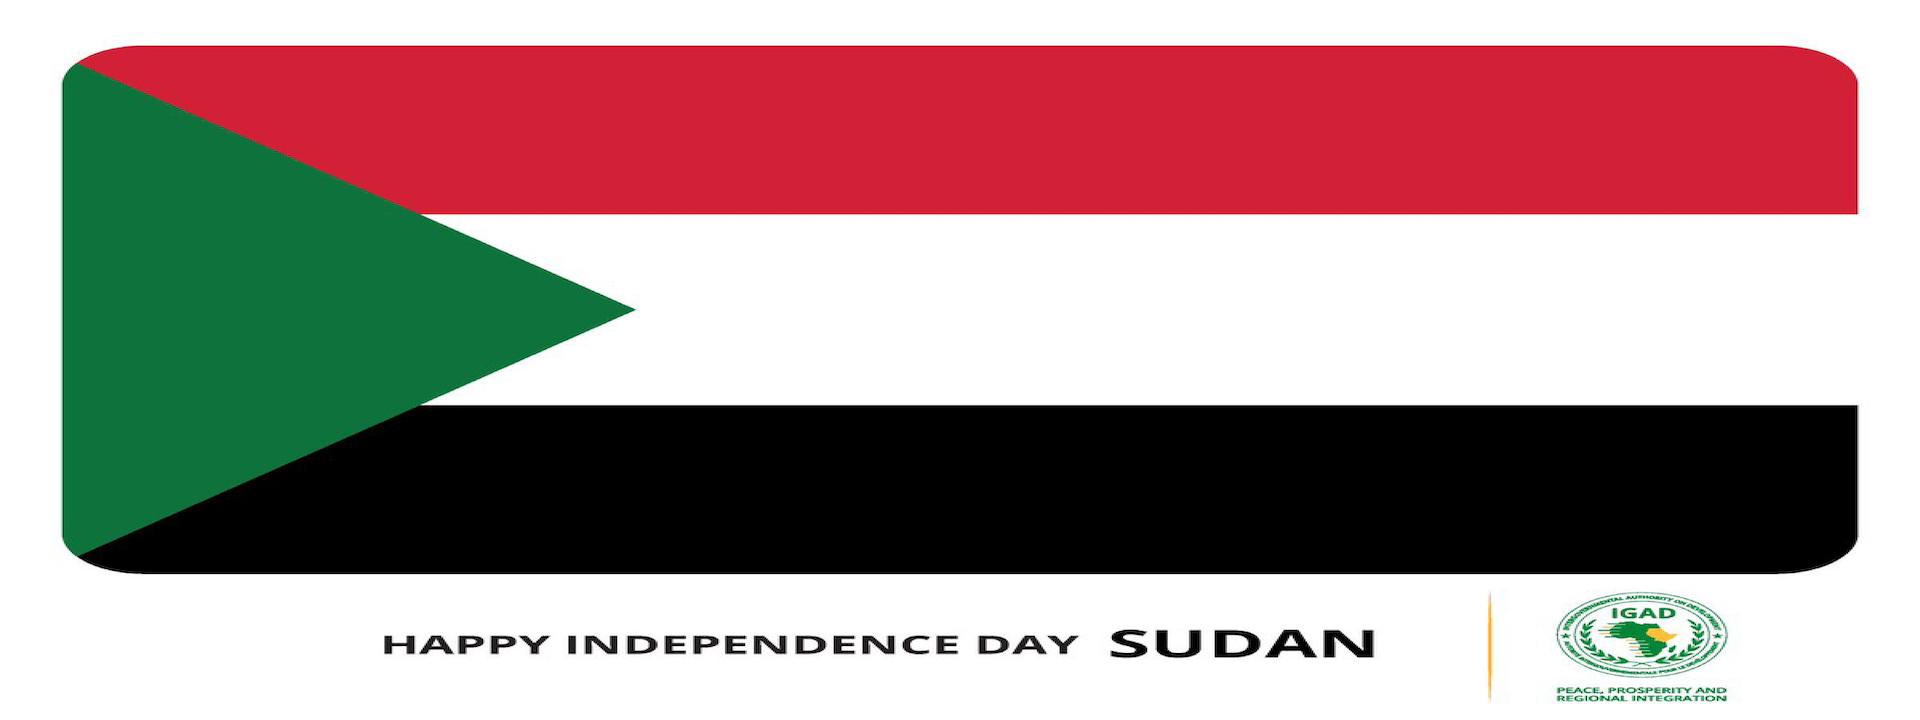 Happy Independence Day Sudan